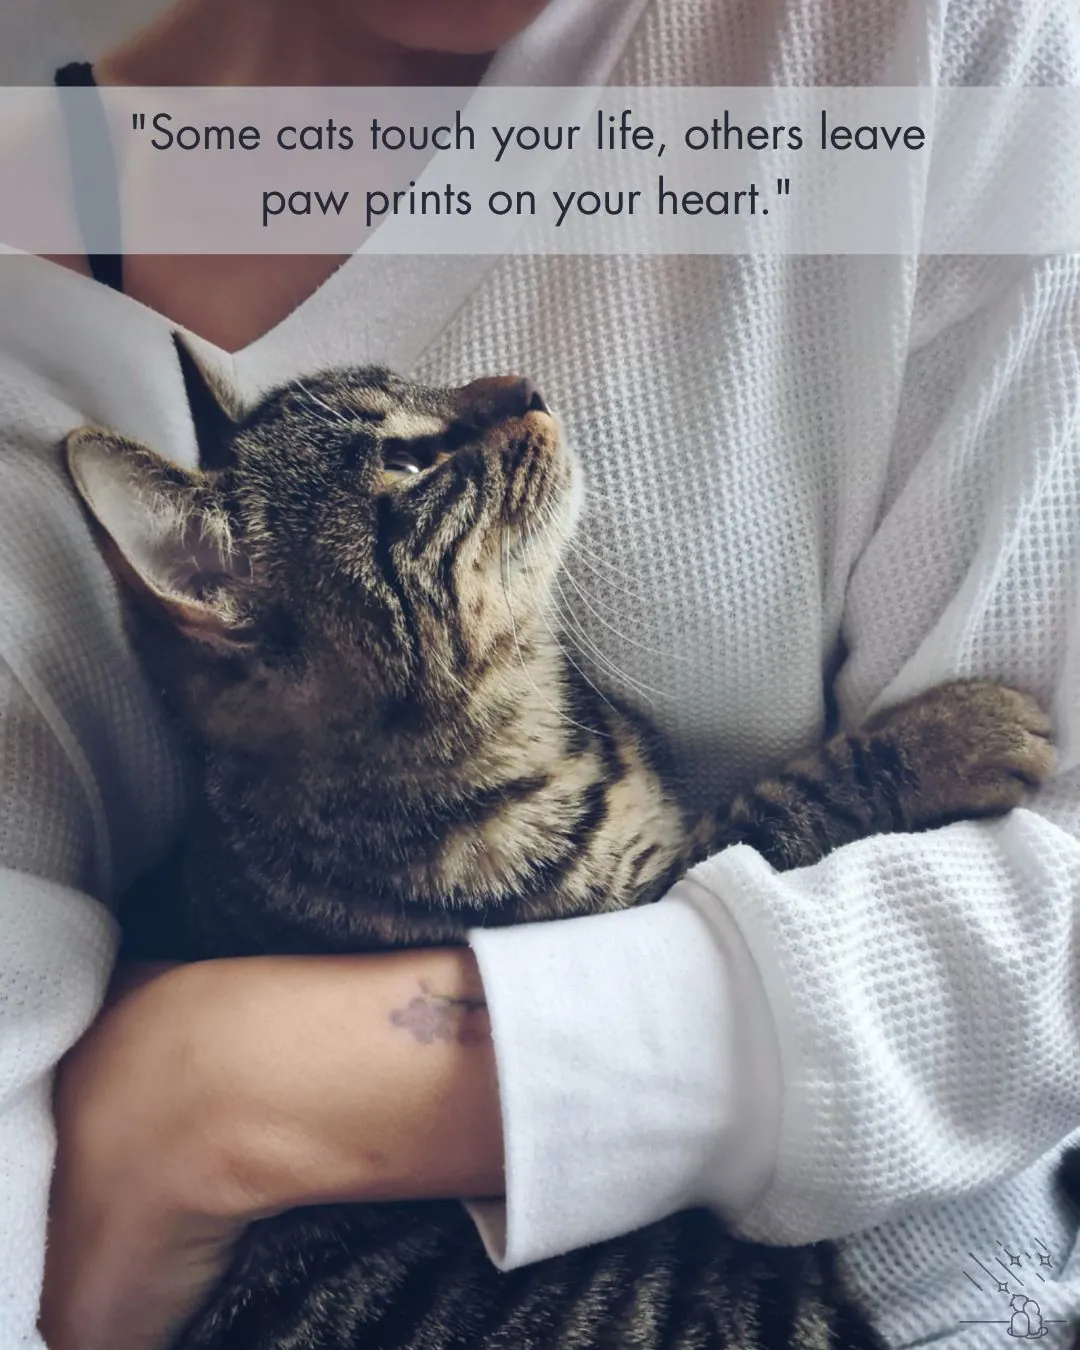 Pet Loss Quotes for Cat Image